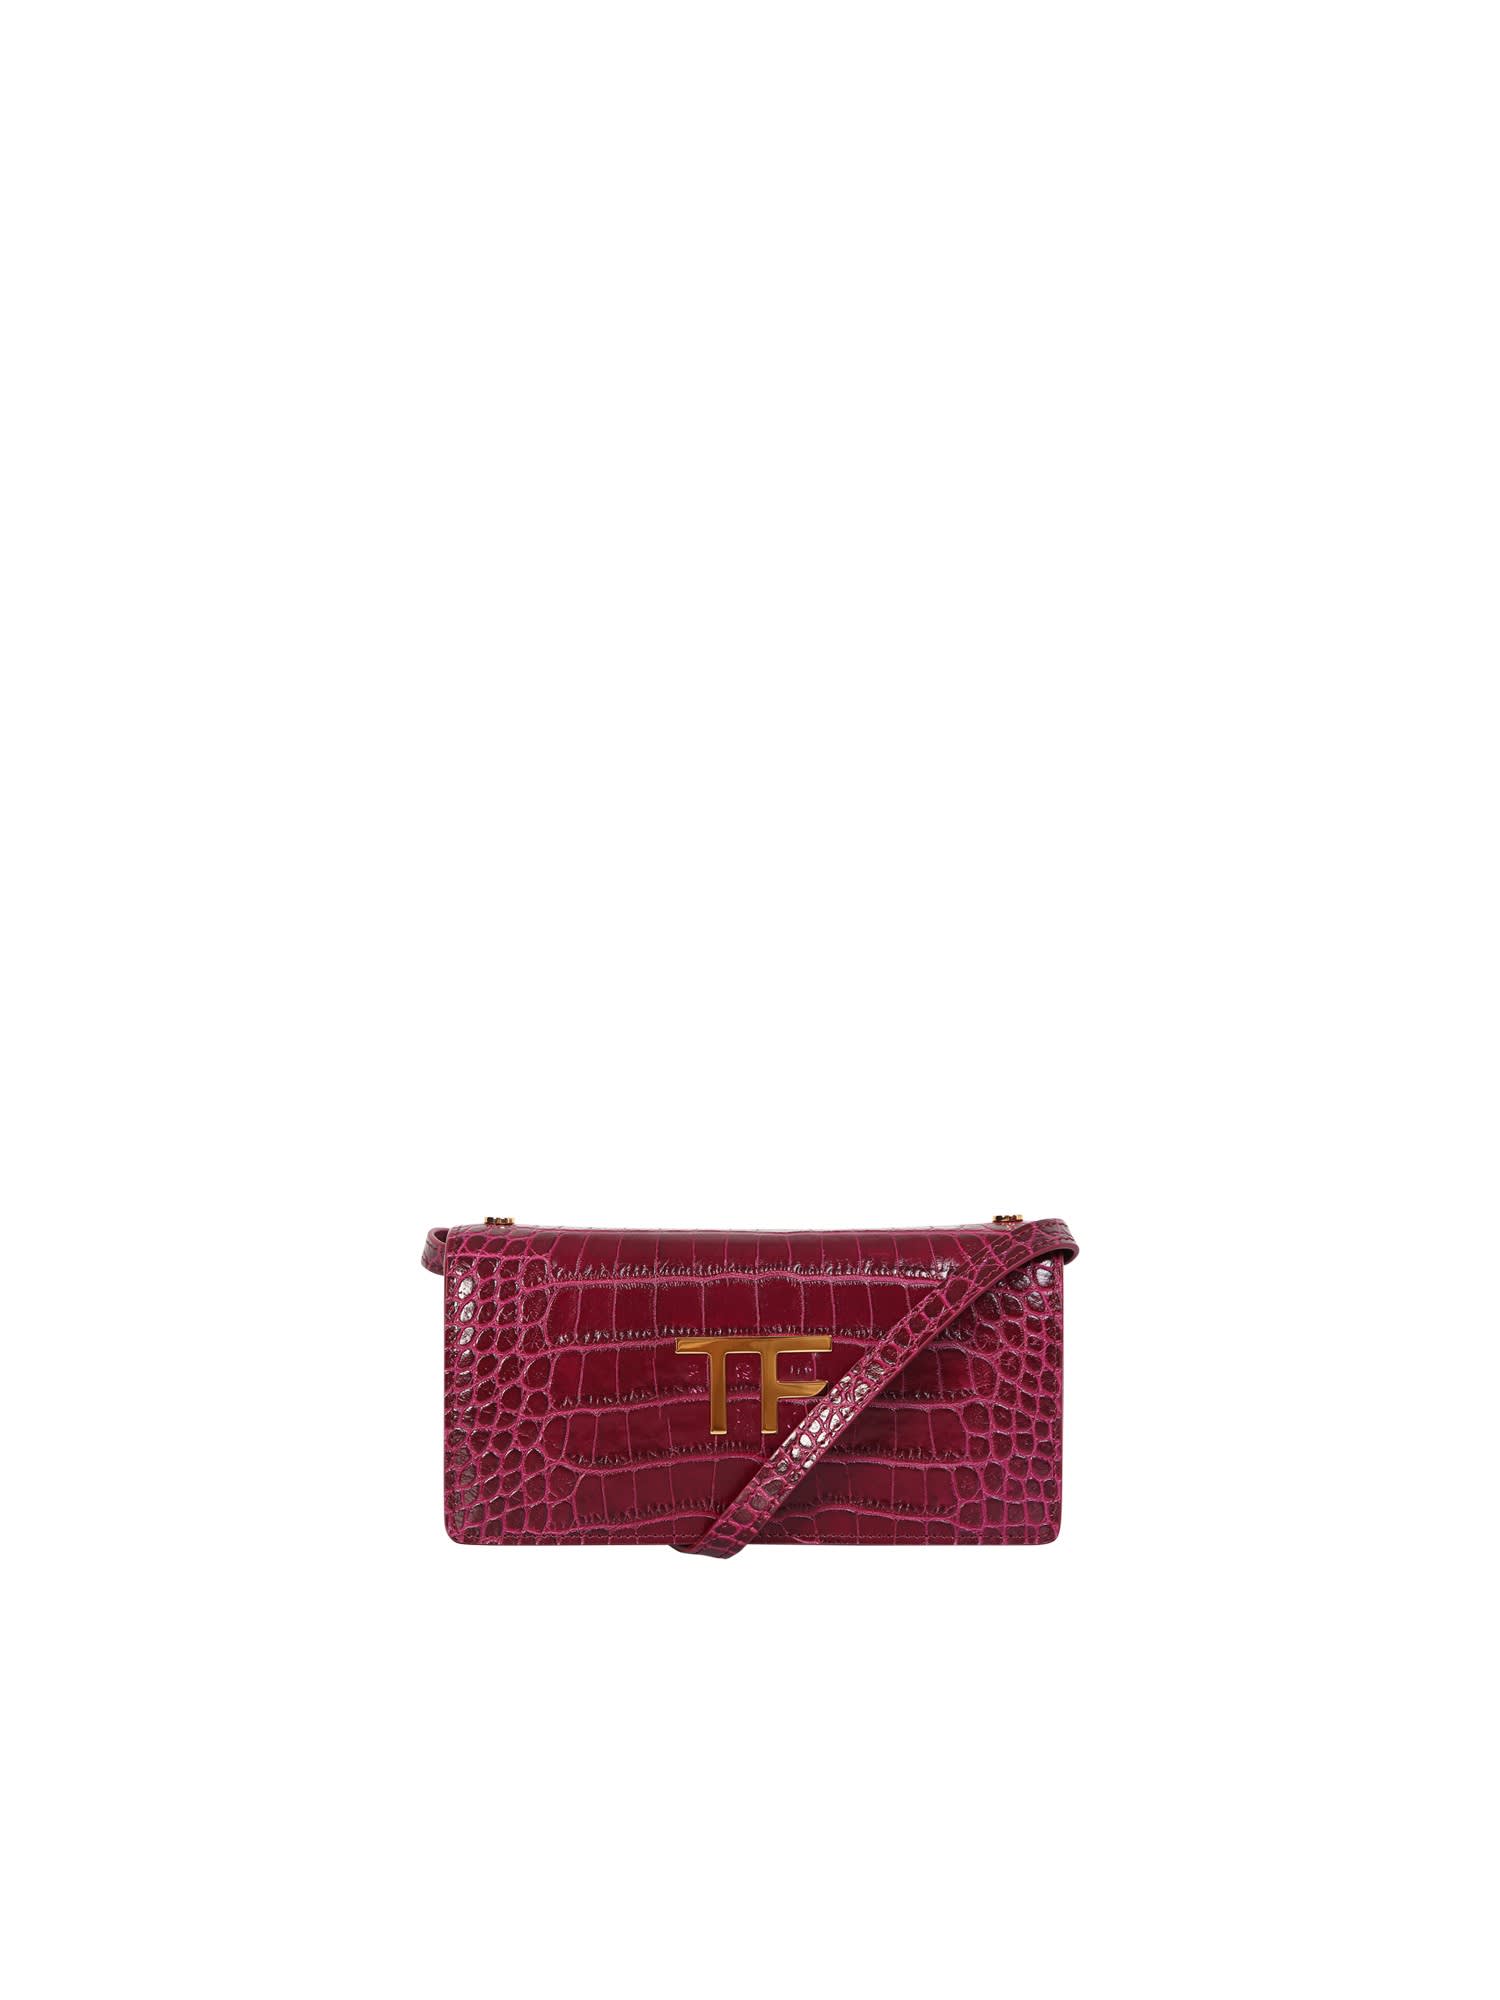 Tom Ford Mini Bag In Leather With Python Print. Versatile And Exclusive, This Bag Boasts A Unique And Casual Identity